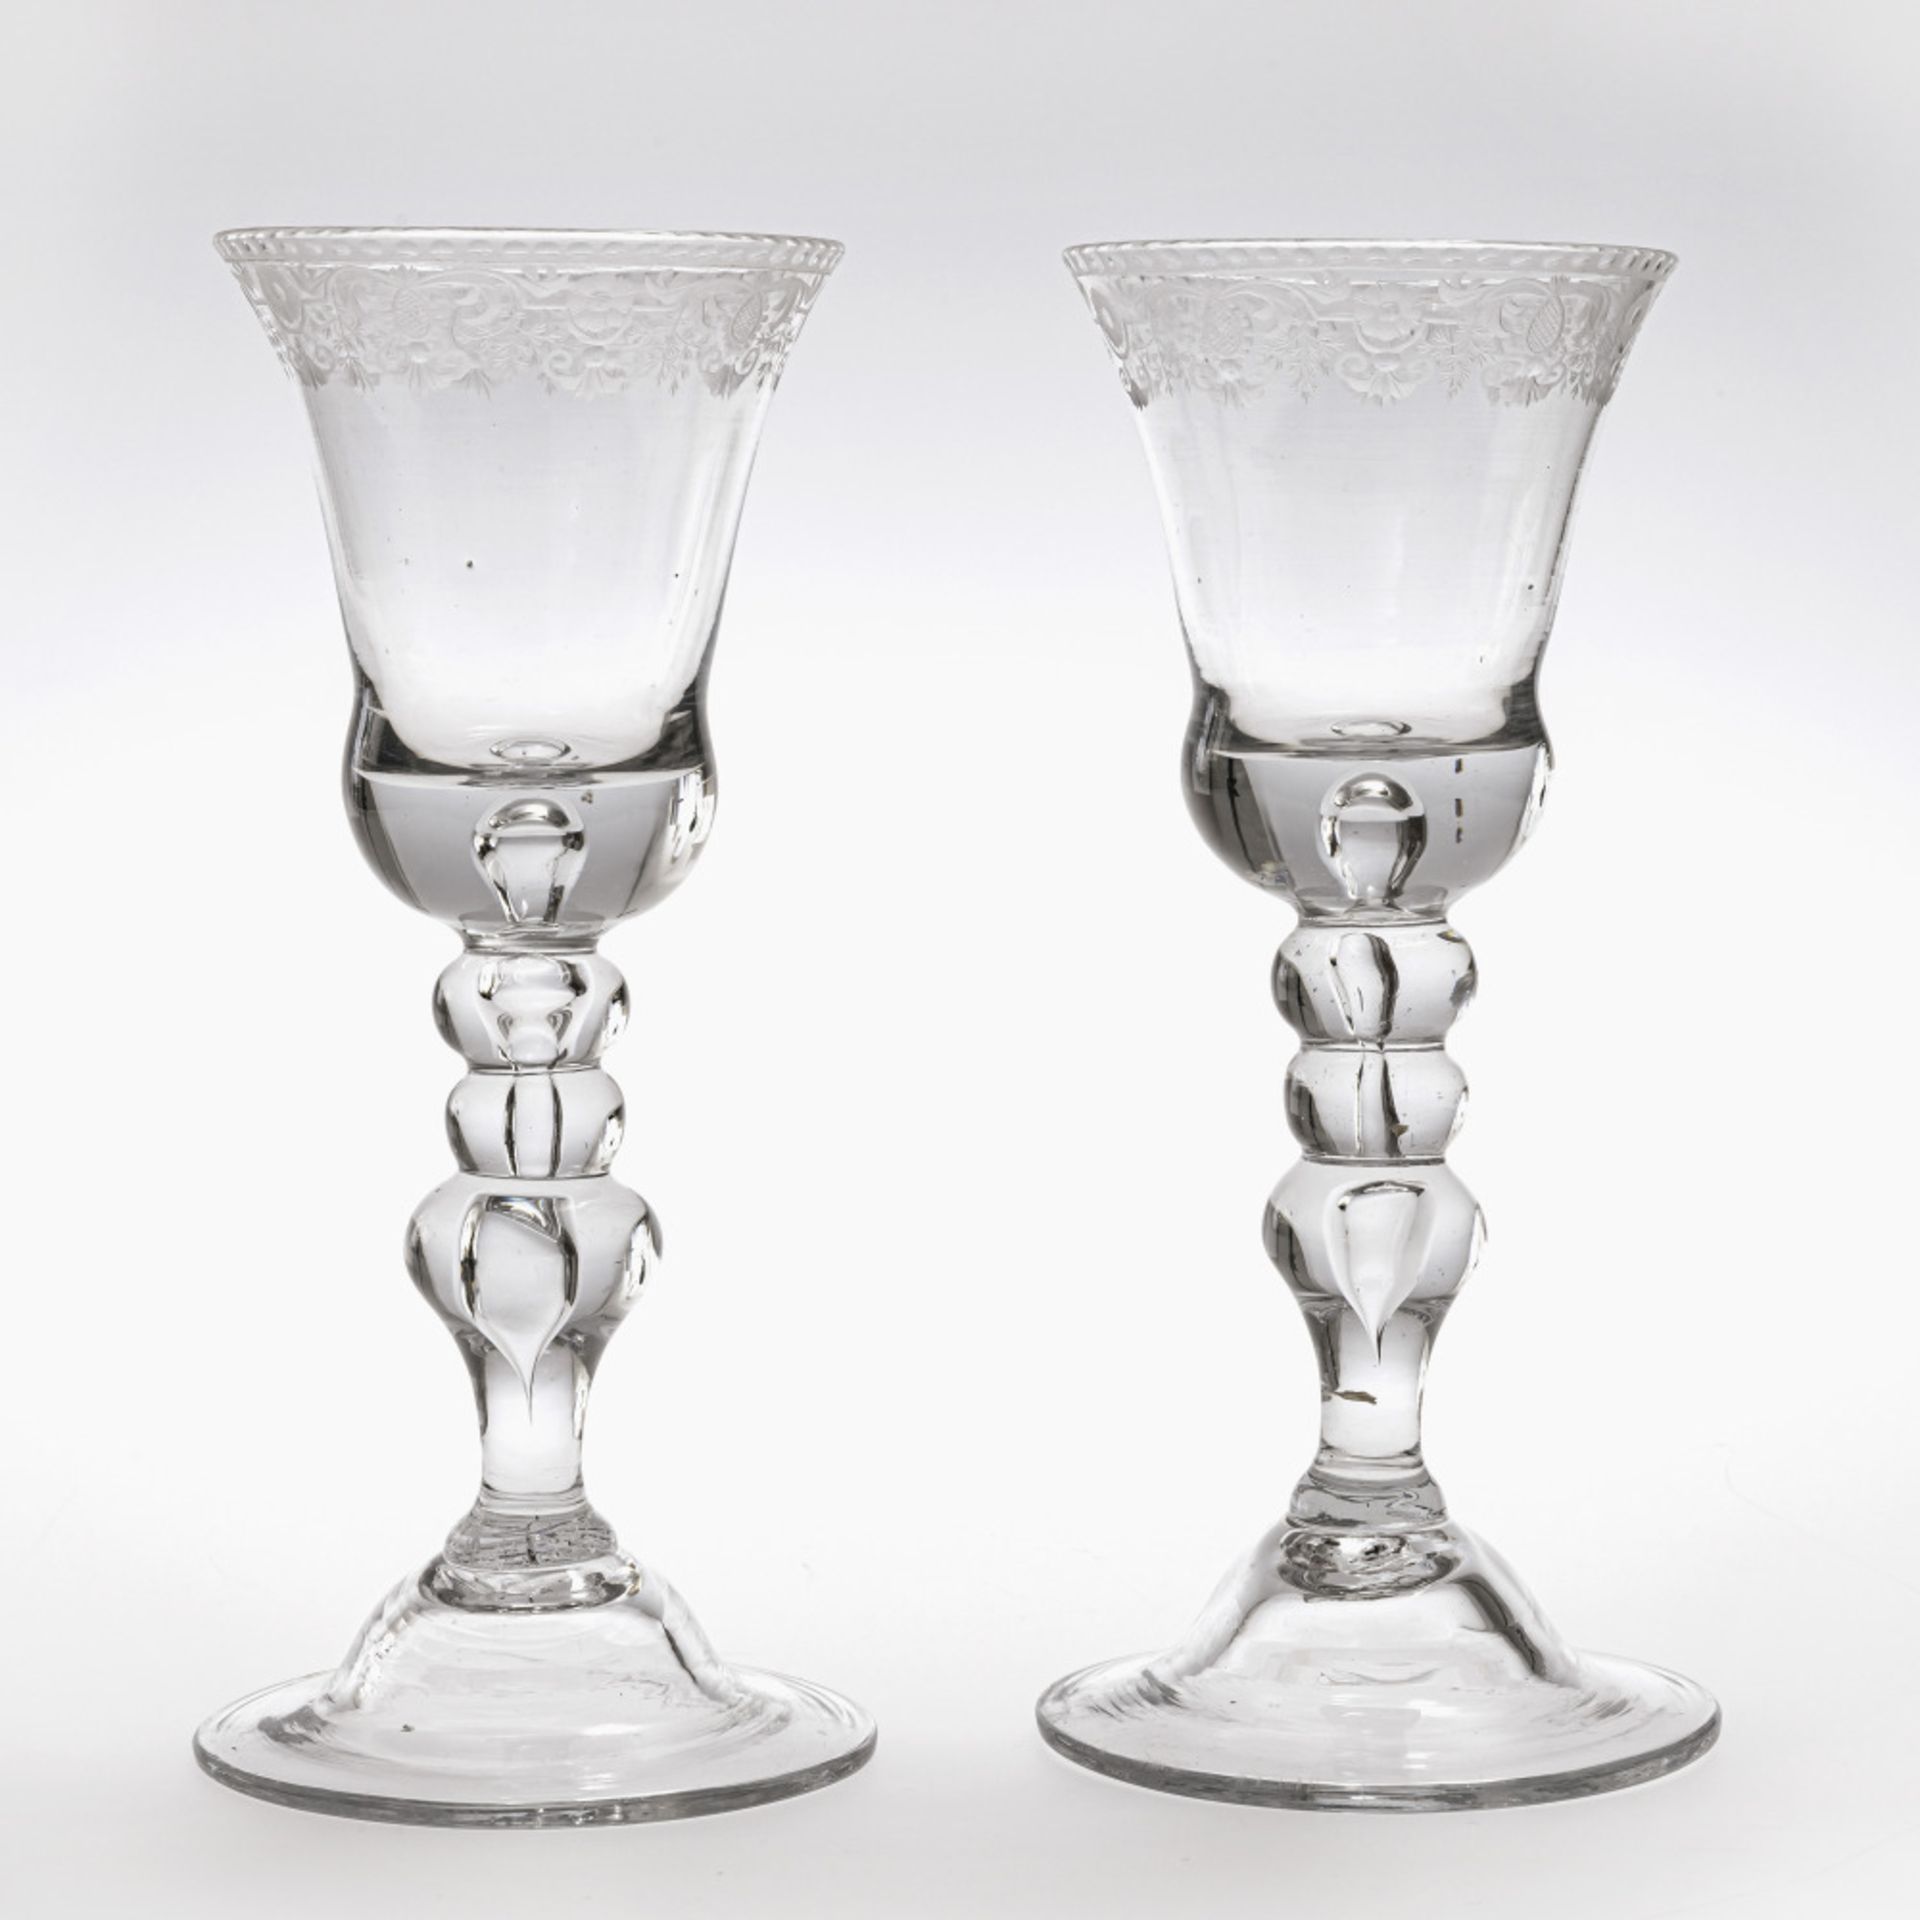 Two goblets - England (?), 18th century